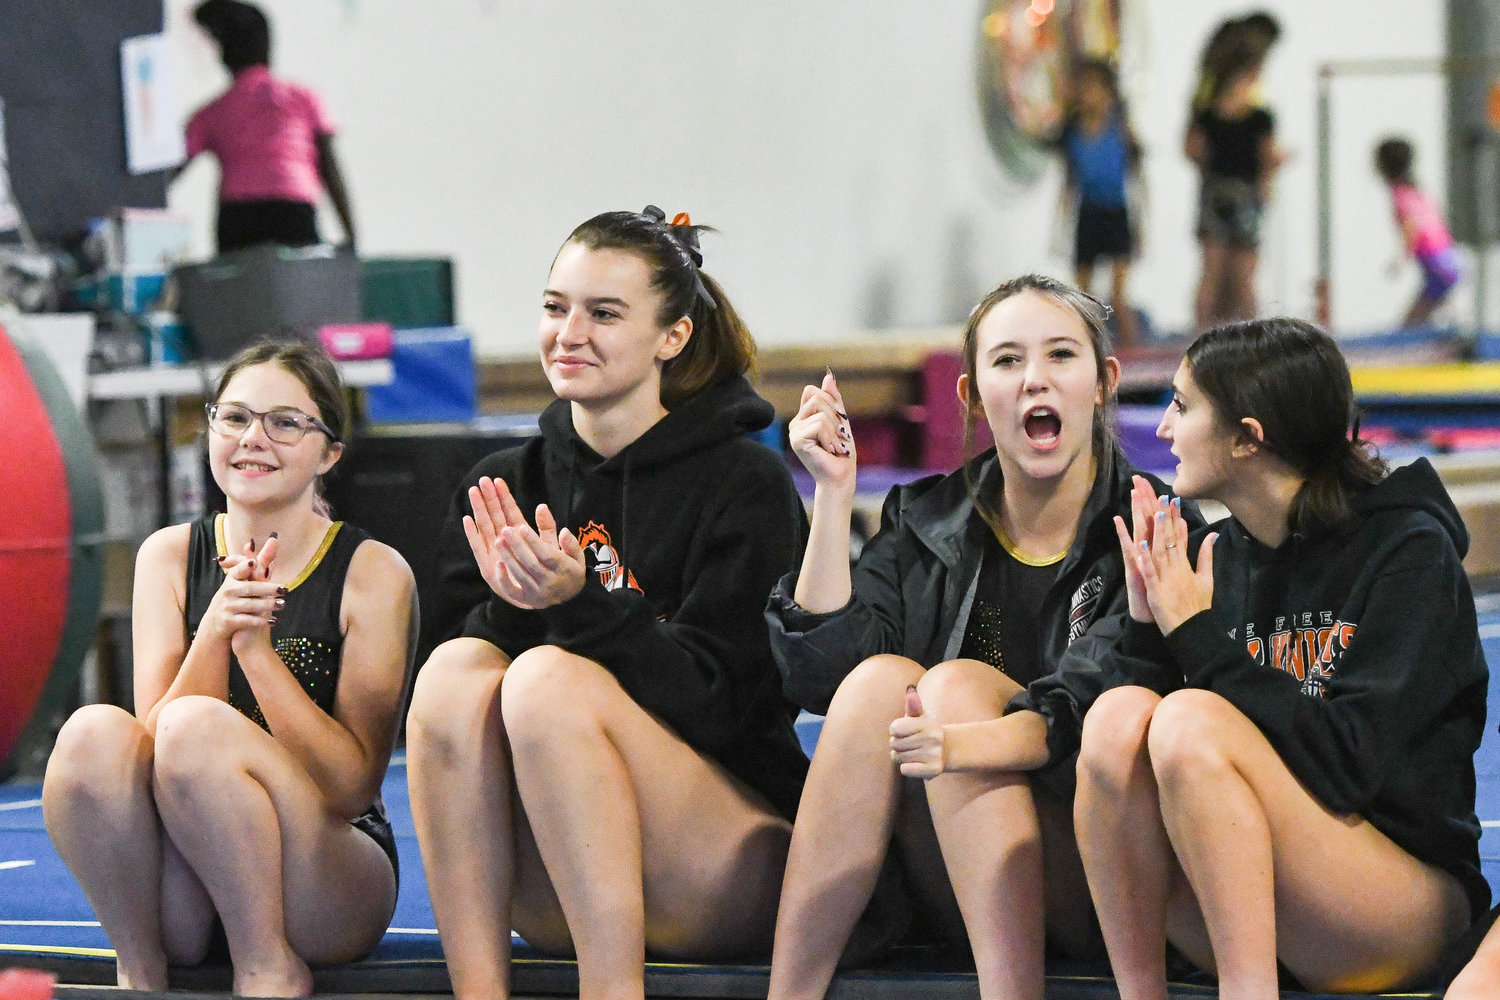 Rome Free Academy gymnastics team members cheer on a teammate competing in bars during competition on Thursday at Valley Gymnastics in Utica.